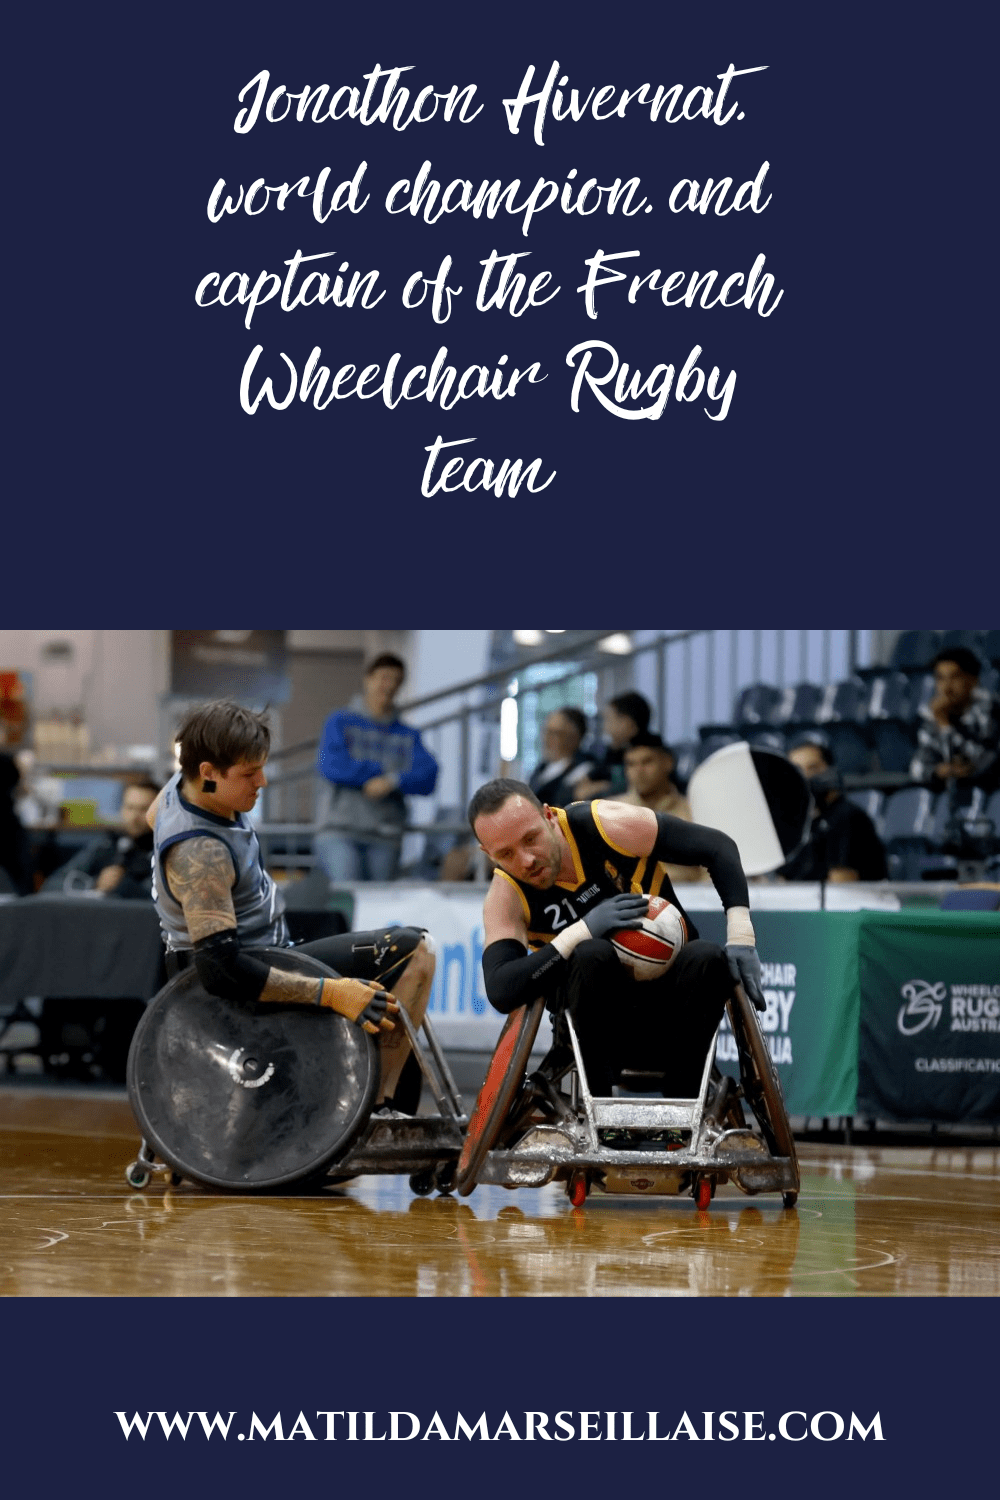 We chat to Jonathon Hivernat, World Champion and captain of the French Wheelchair Rugby team